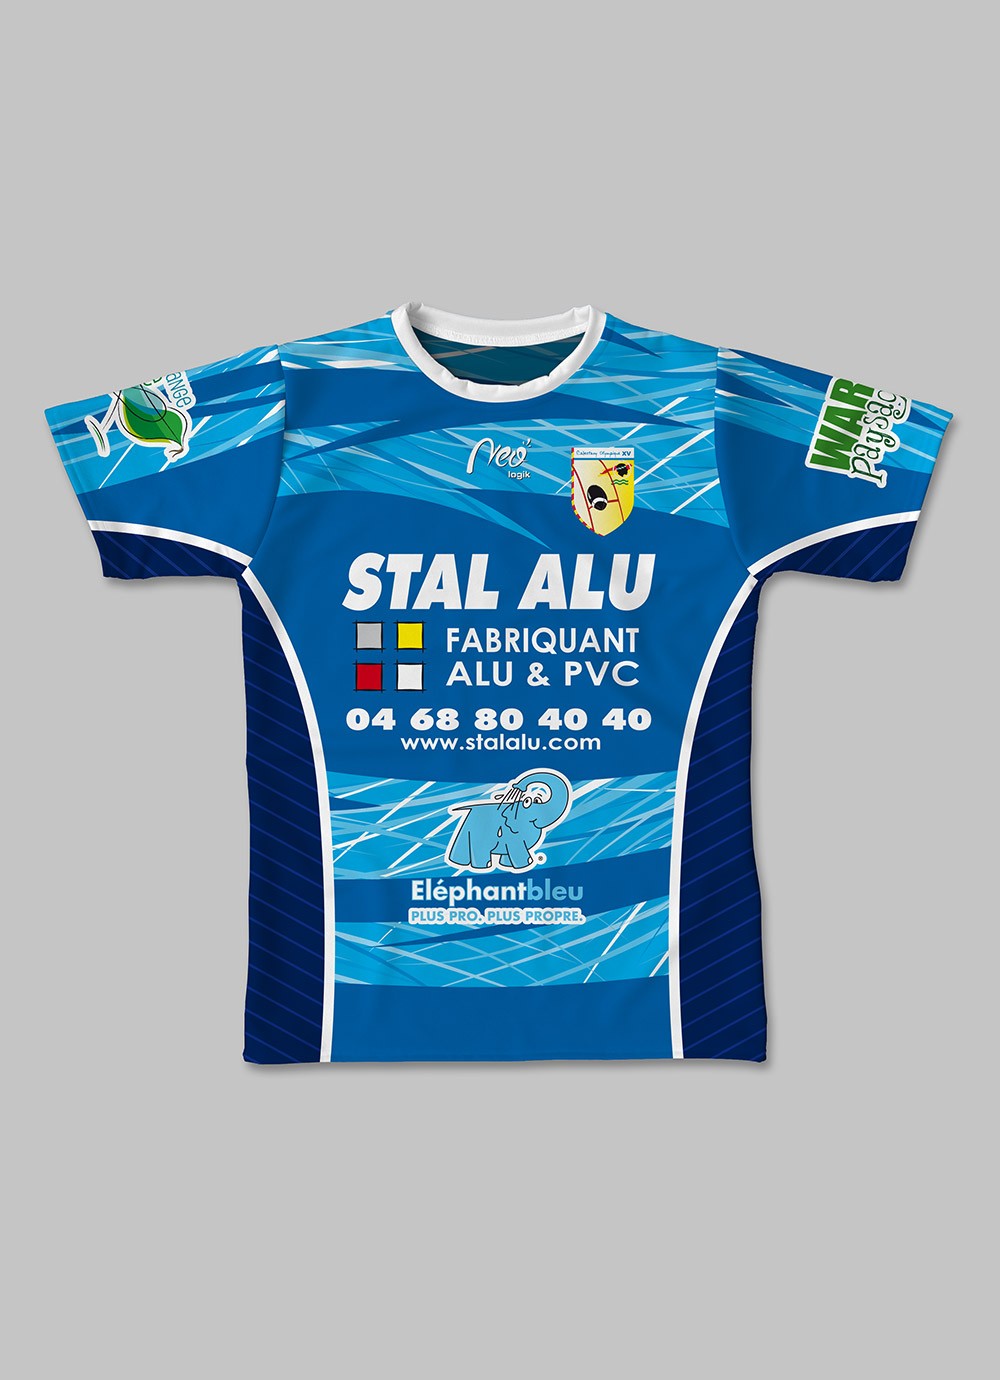 Maillot de match COC Rugby 2018-2019